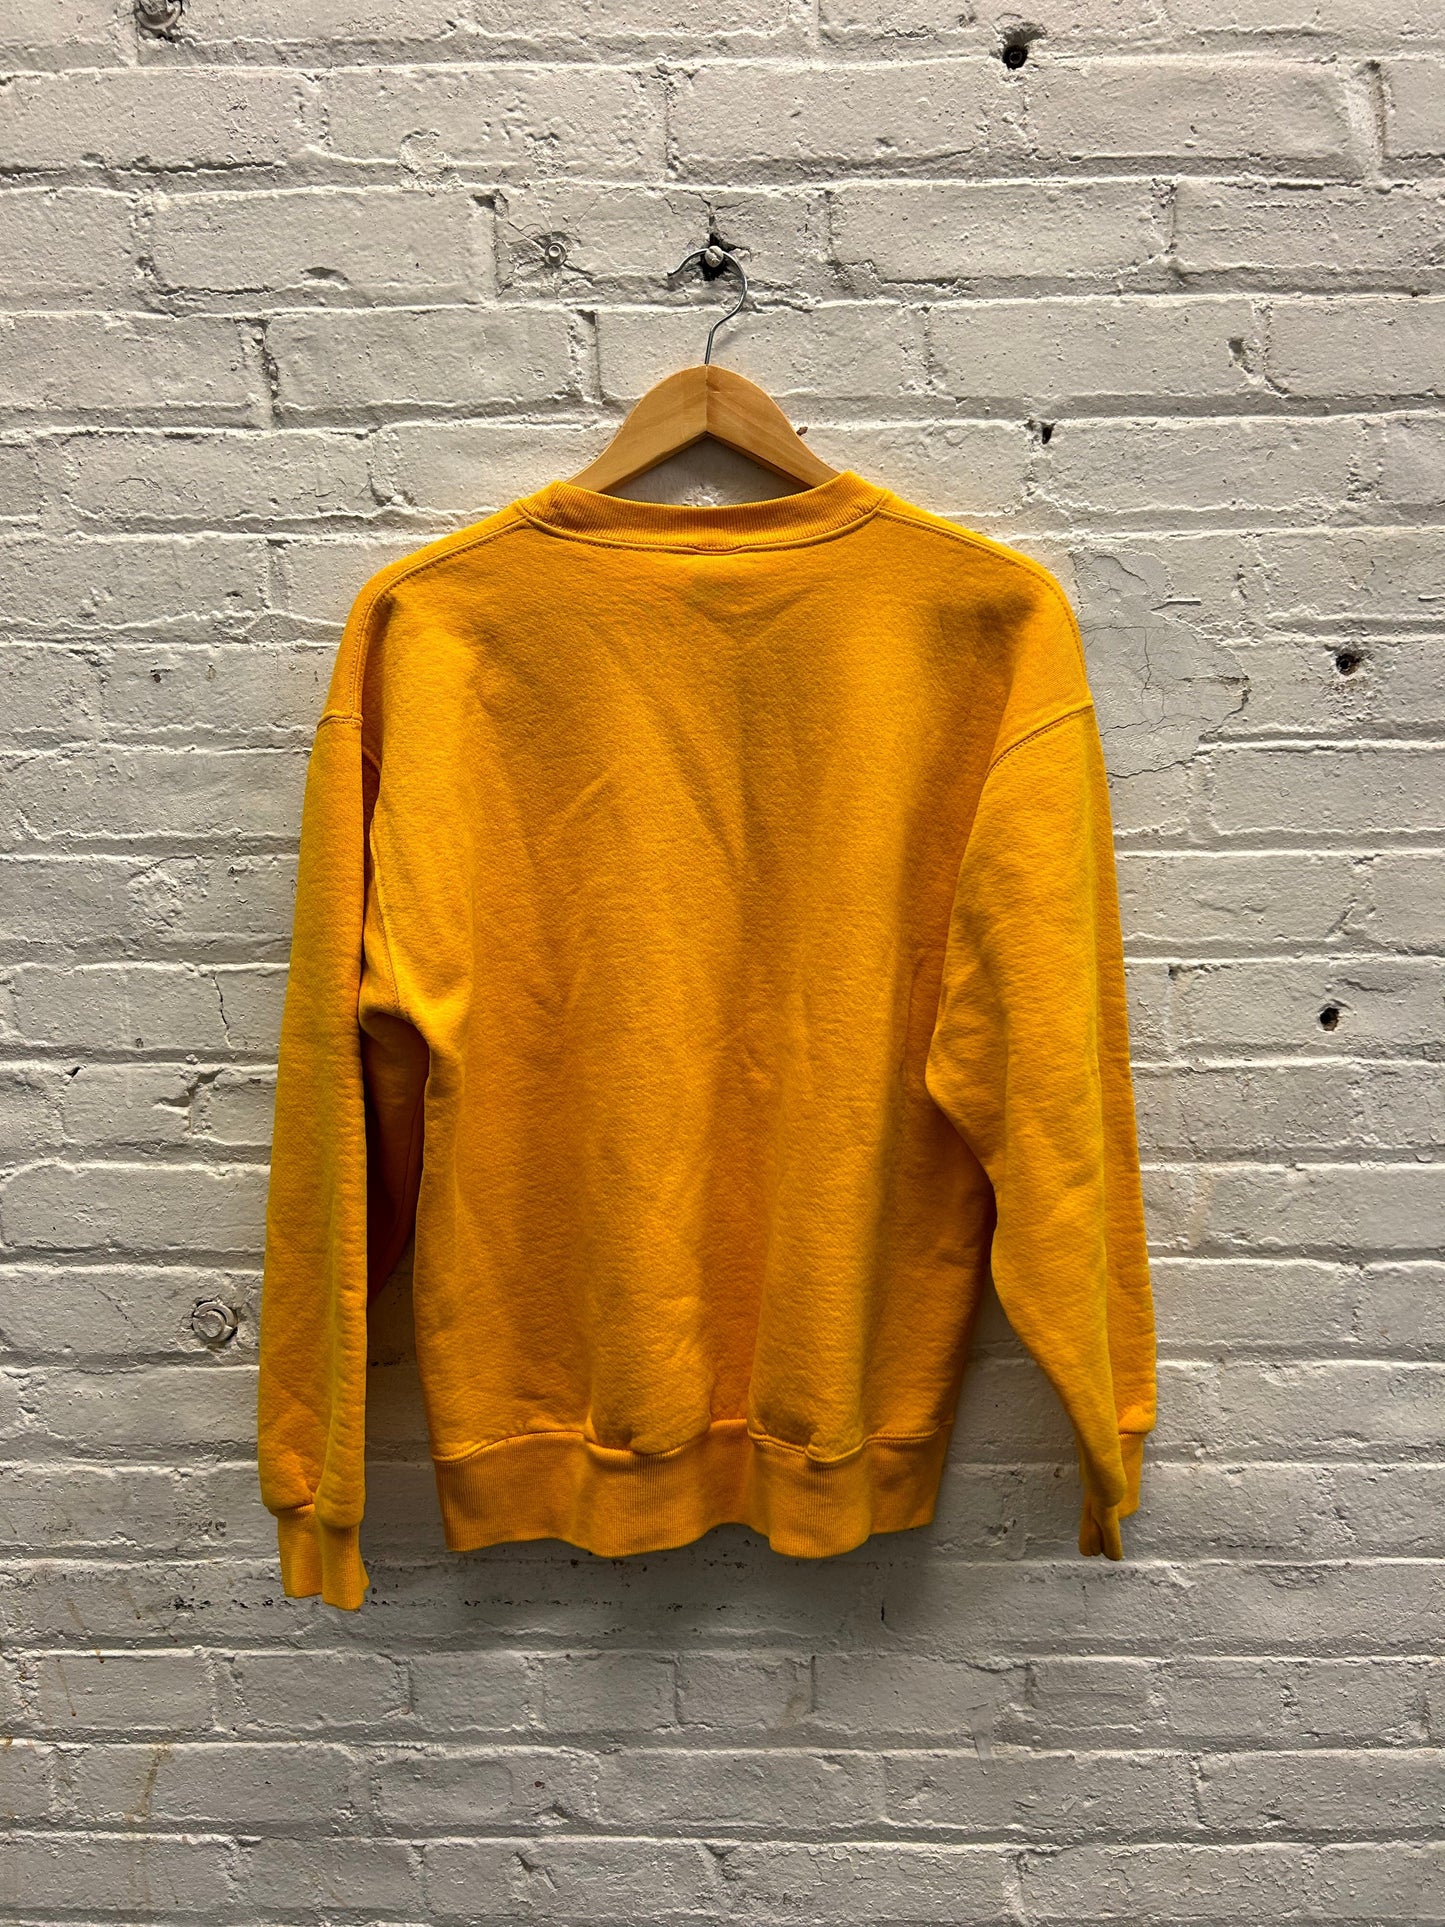 Russell Athletic Yellow Crewneck - Large